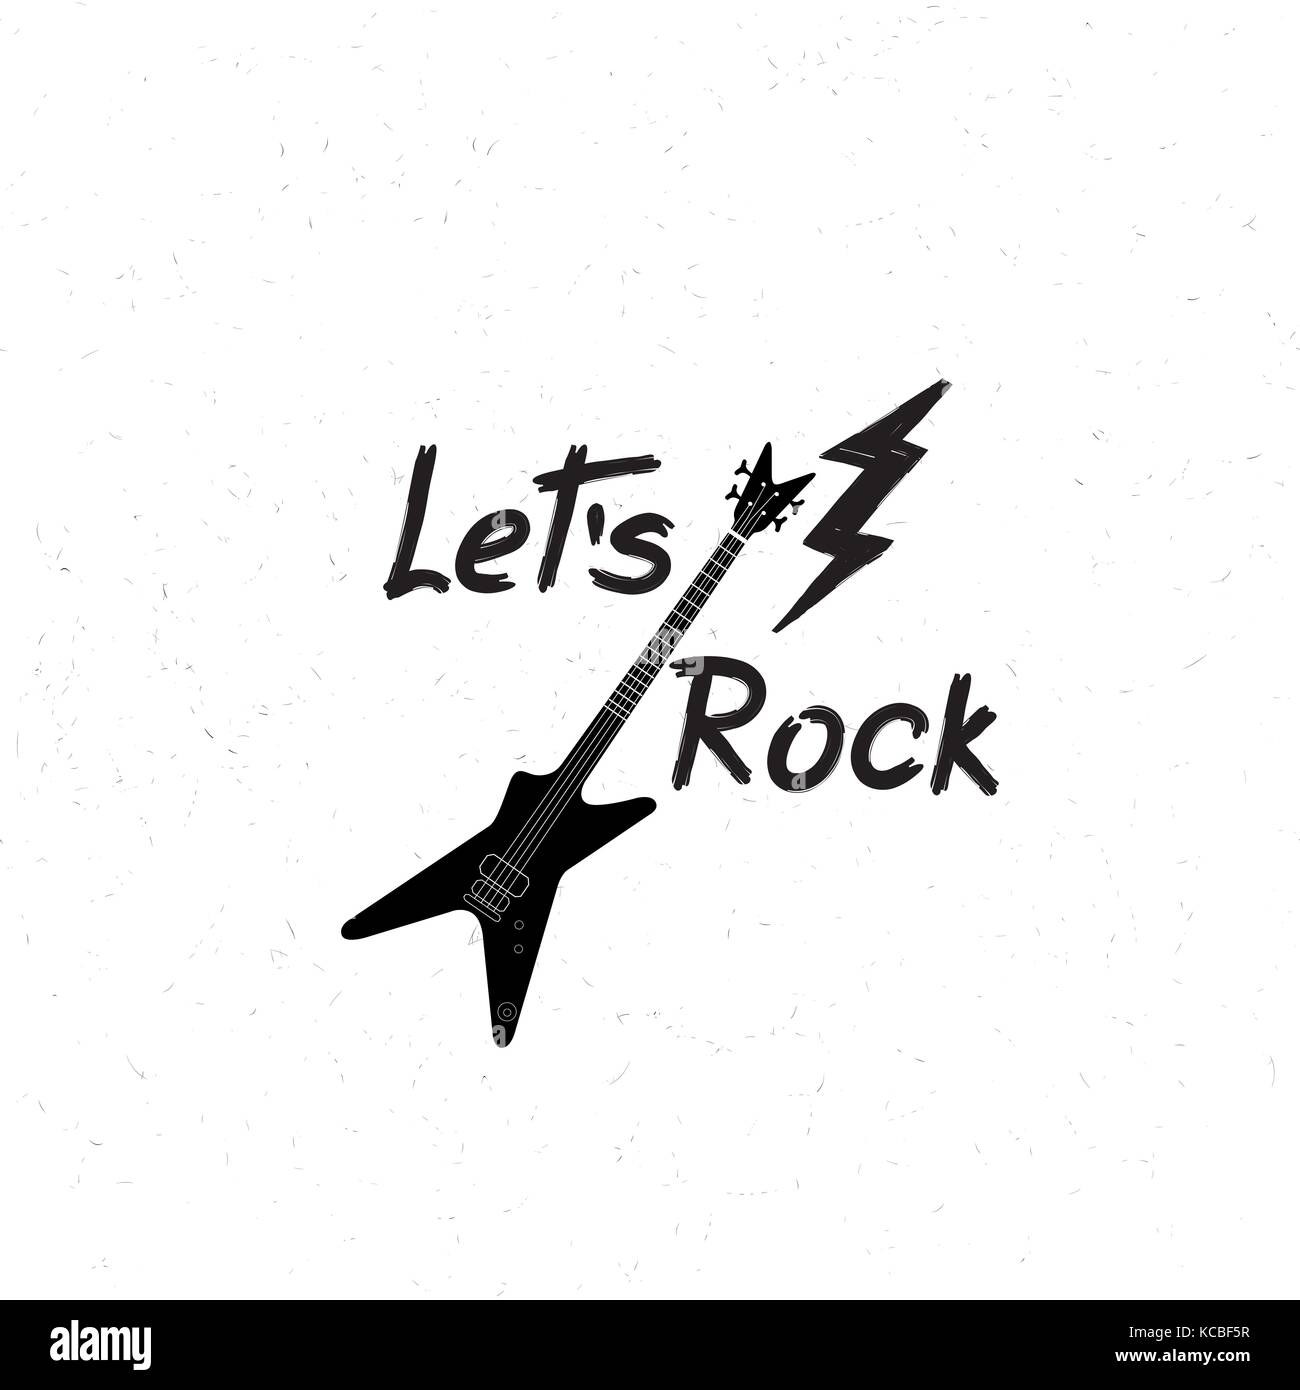 Rock music banner. Musical sign background. Let's rock lettering with lightning and guitar. Rock'n' roll label. Stock Vector